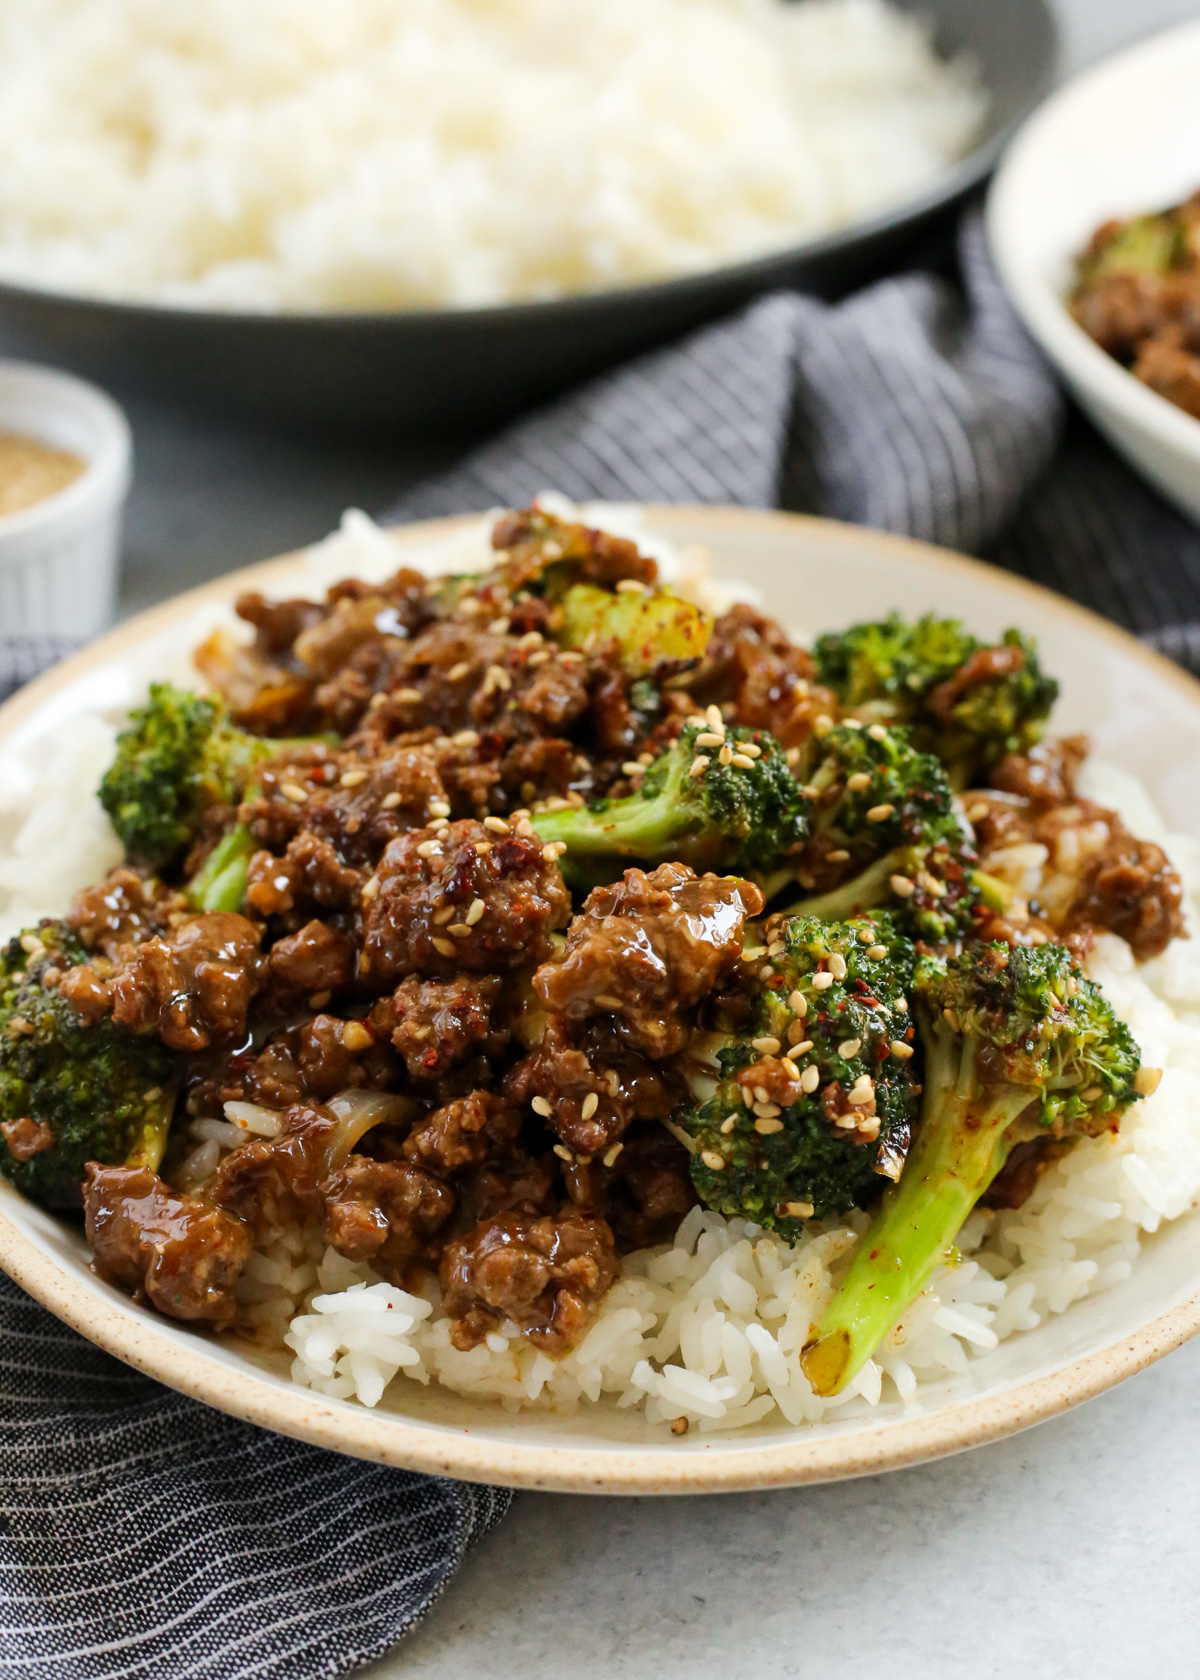 A side view of a plate filled with steamed white rice and covered with ground beef and broccoli in a silky savory sauce, garnished with toasted sesame seeds and ref pepper flakes